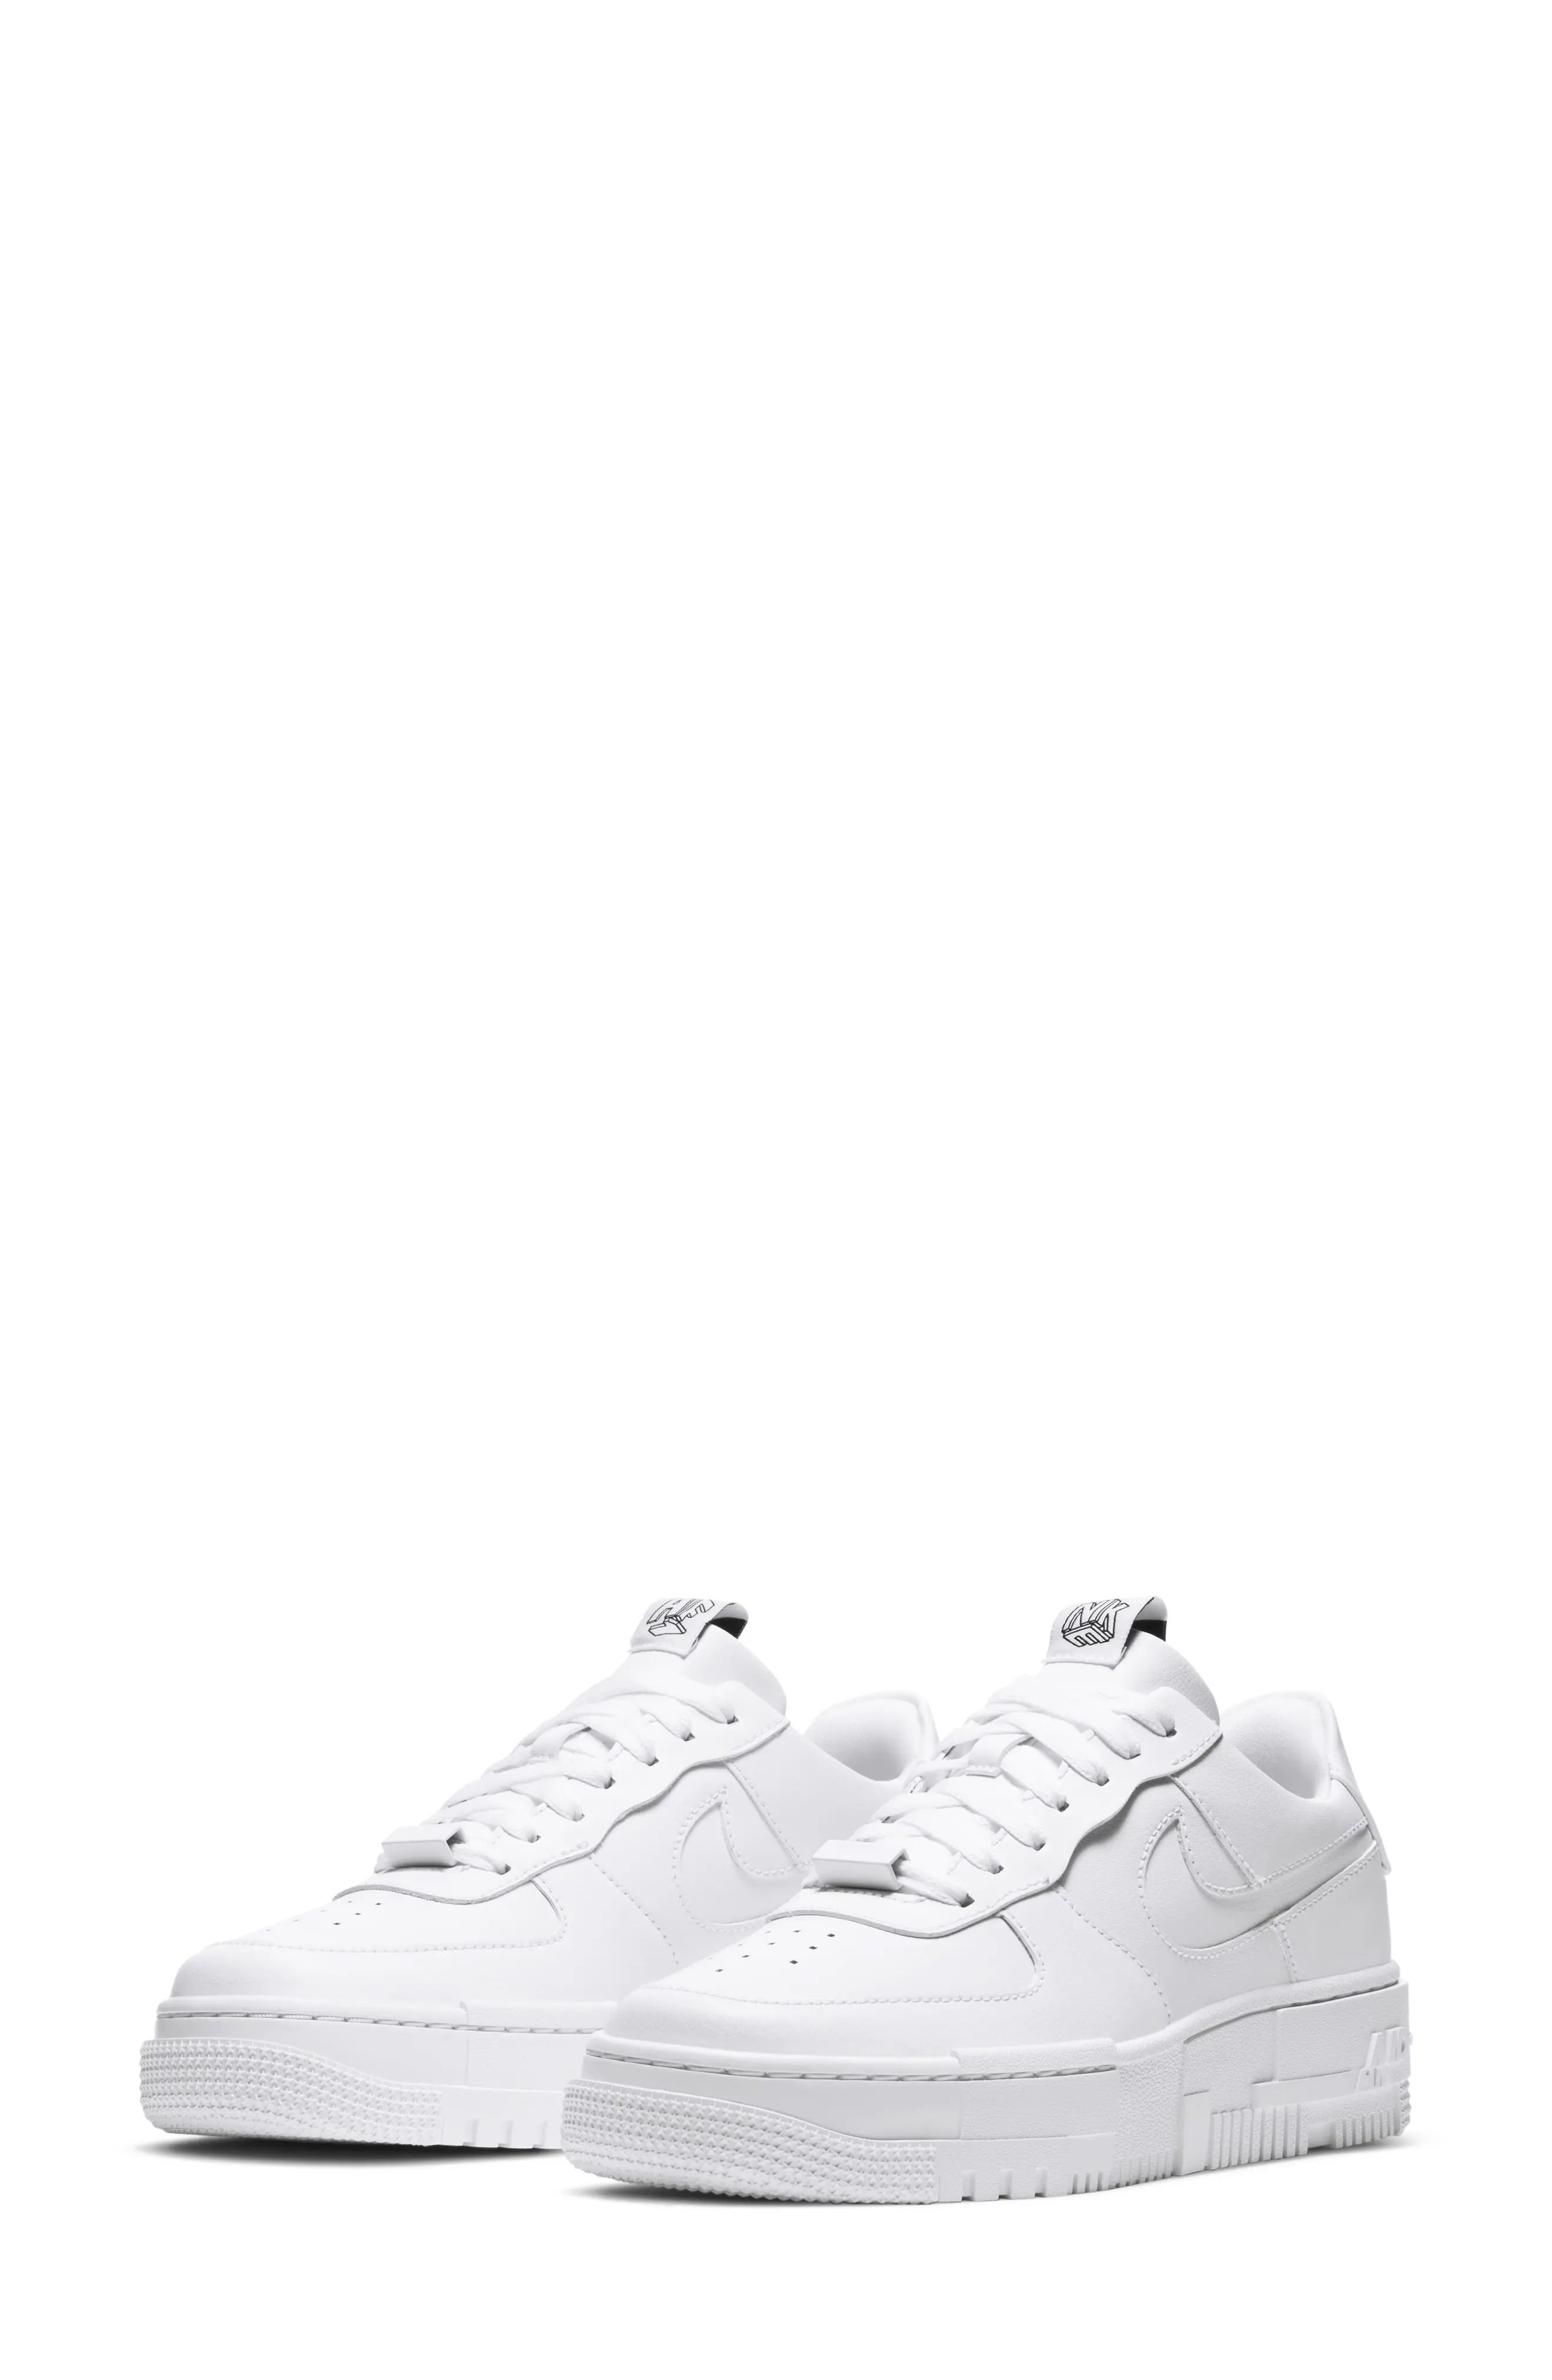 Nike Air Force 1 Pixel Sneaker in White/White/Black/Sail at Nordstrom, Size 7 | Nordstrom